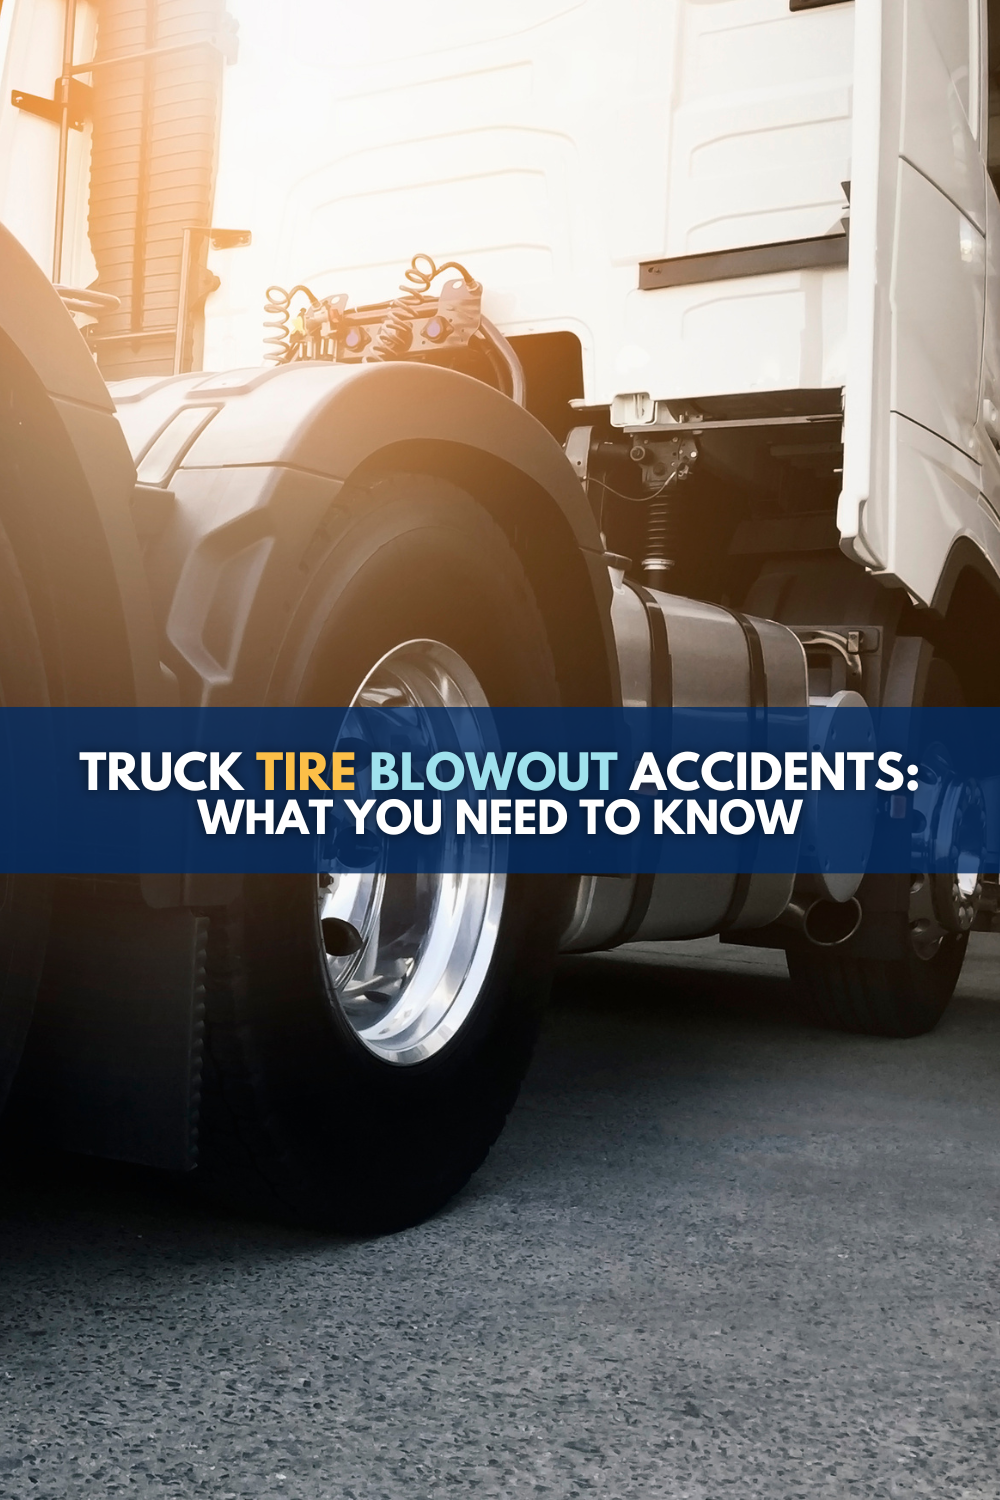 Michigan Truck Tire Blowout Accident: What You Need To Know